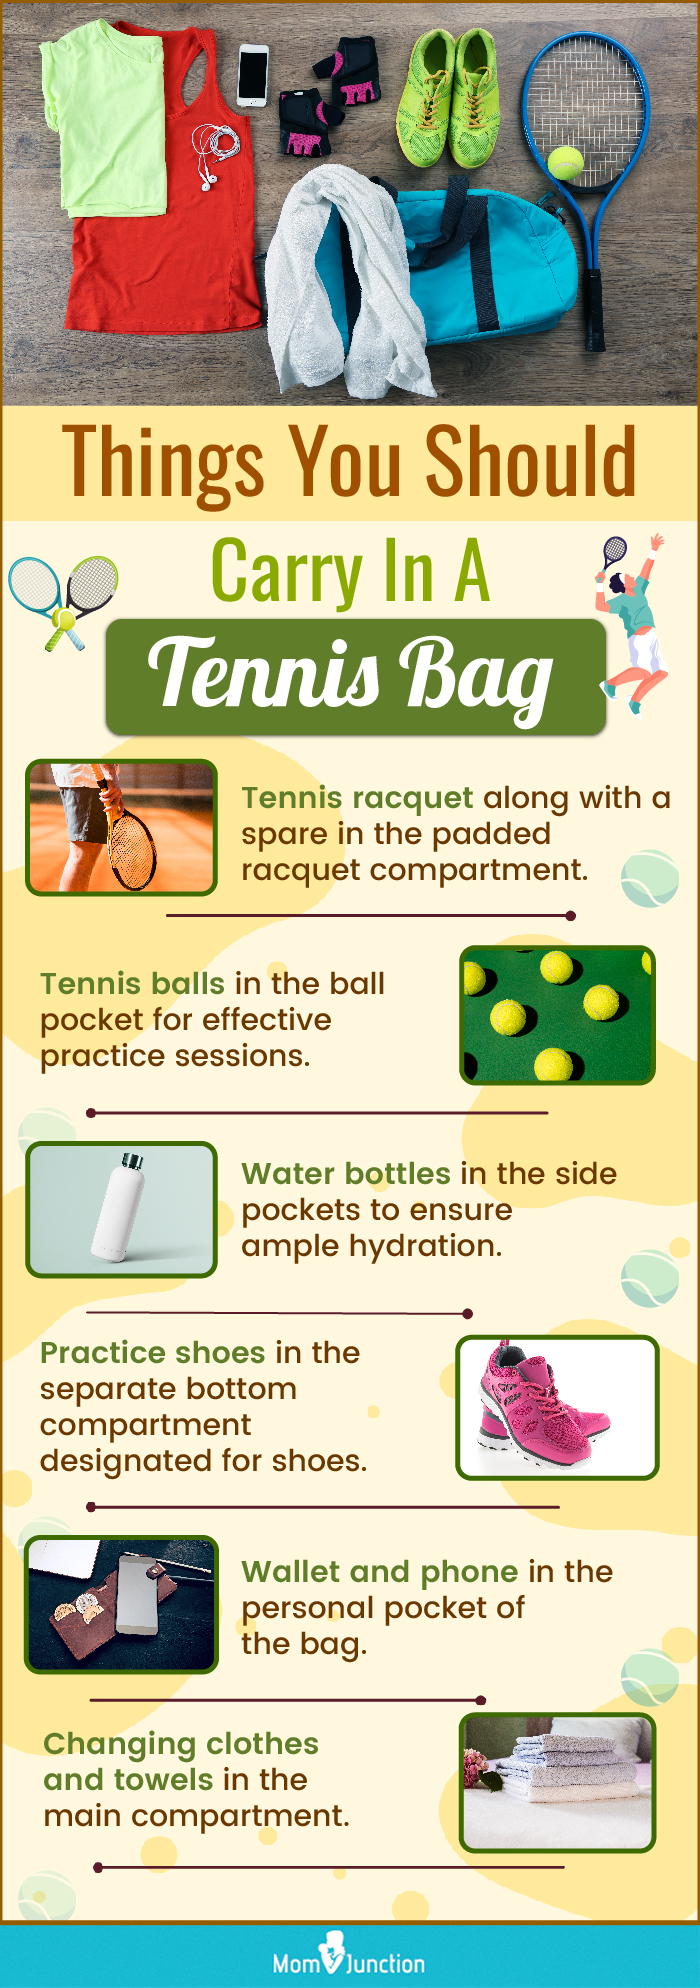 Things You Should Carry In A Tennis Bag(infographic)